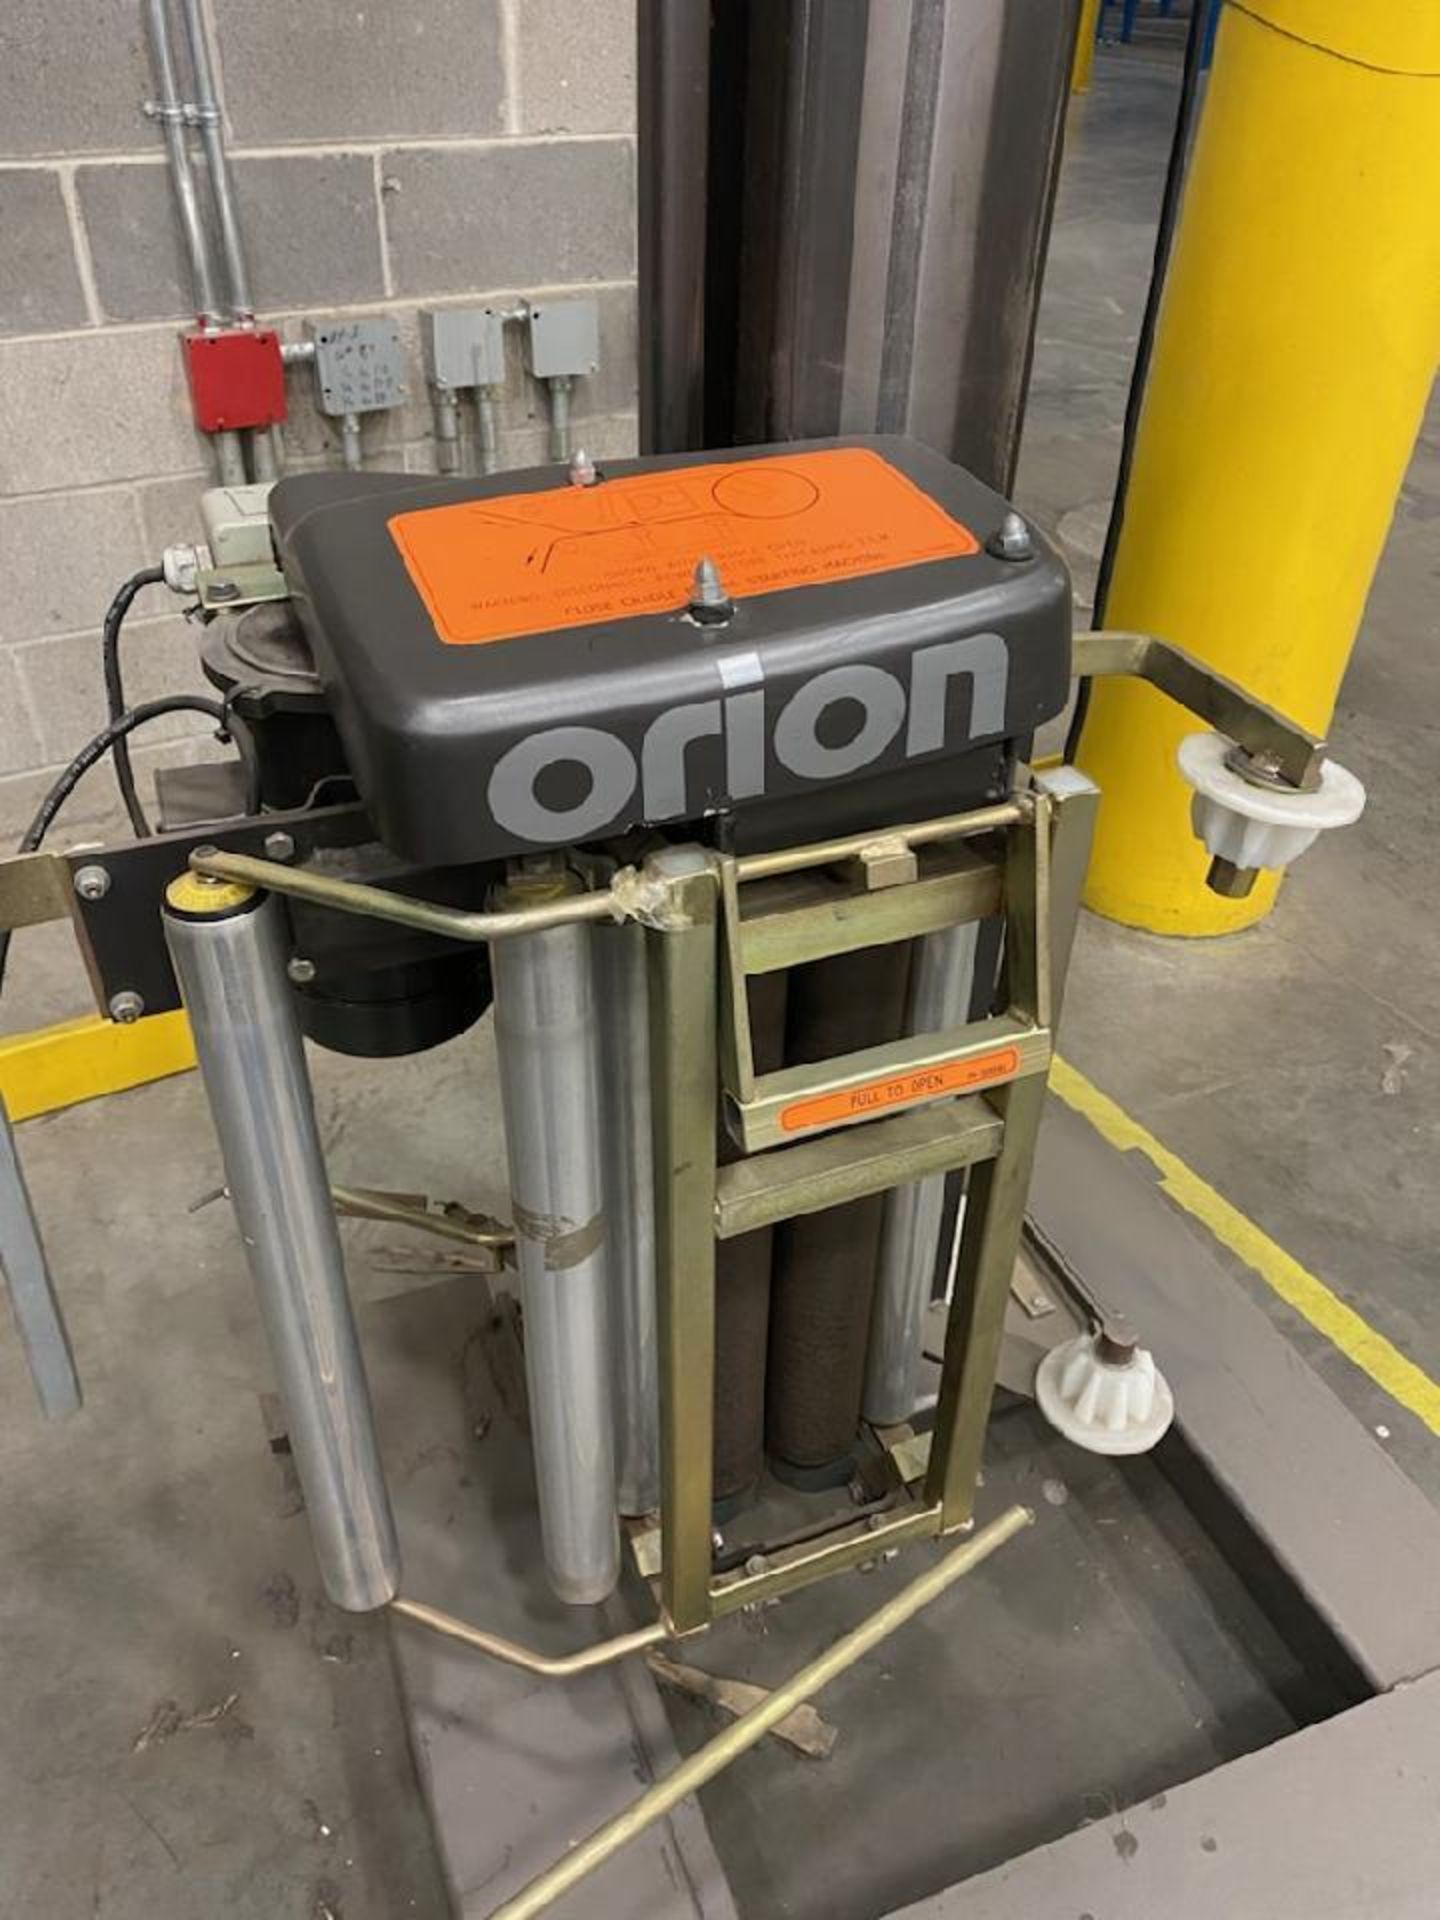 ORION STRETCH WRAPPER, MODEL H77/17, S/N 2006-1017149 - Image 3 of 3